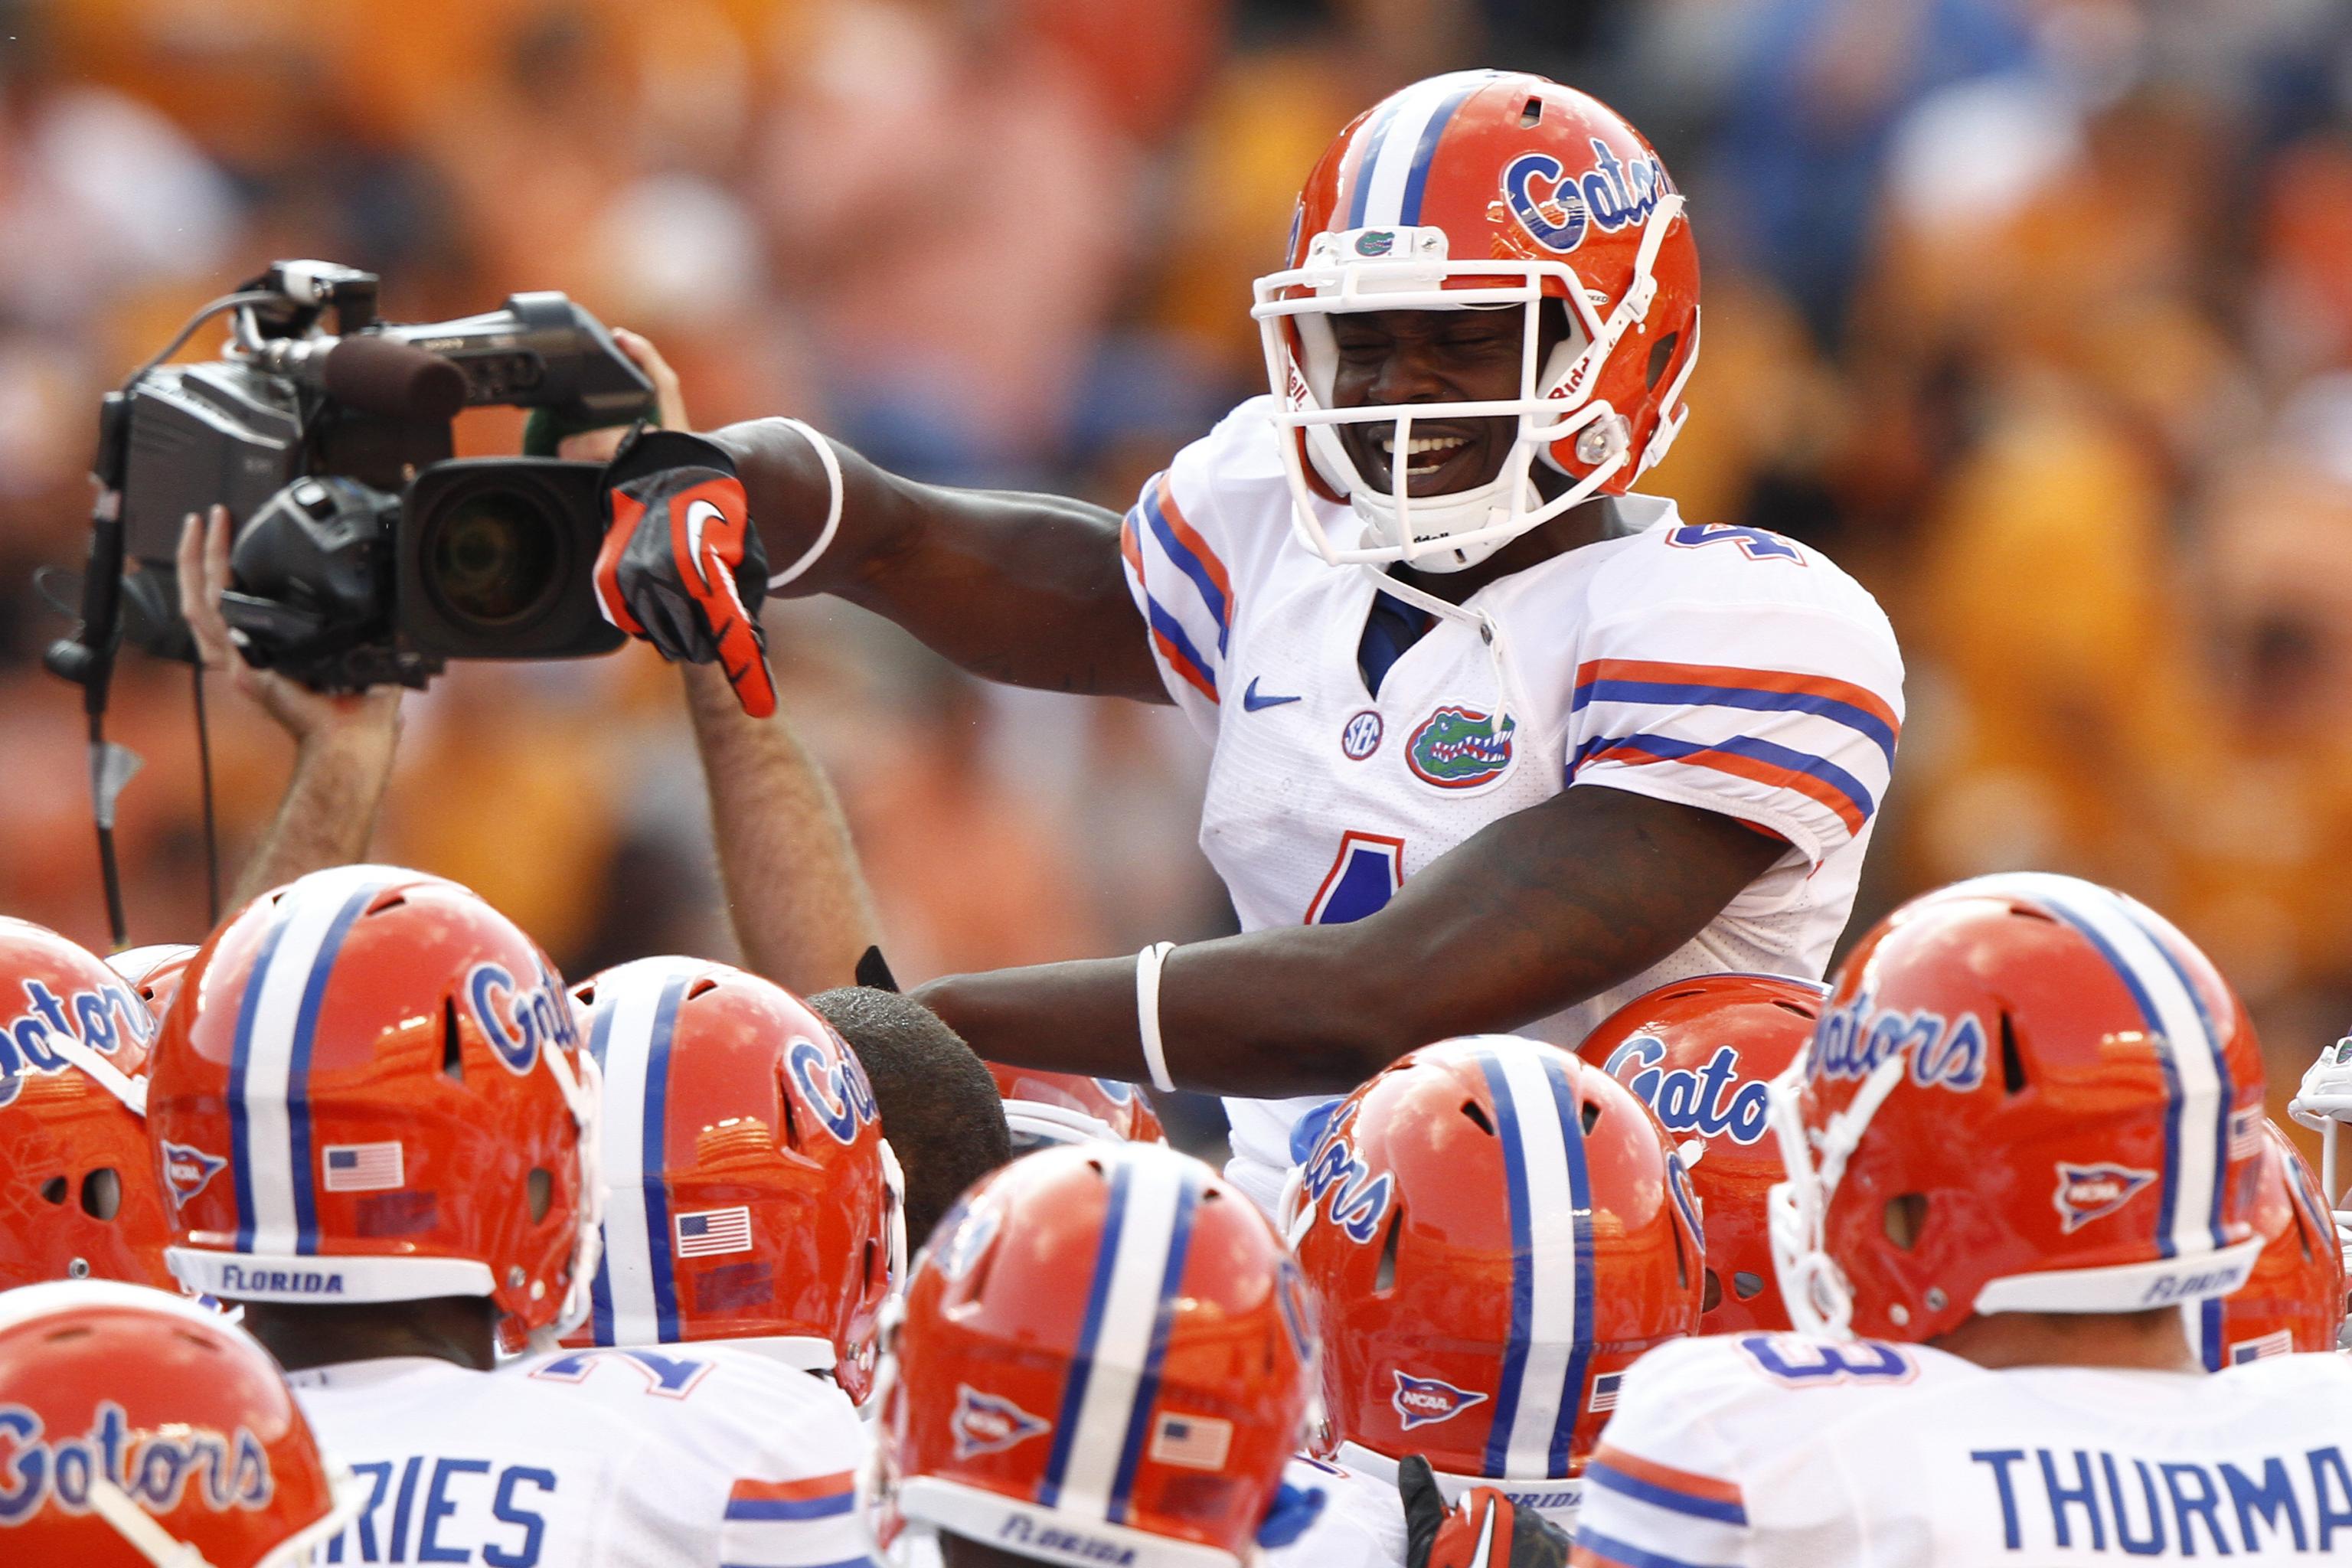 Florida's Andre Debose out for season after ACL tear